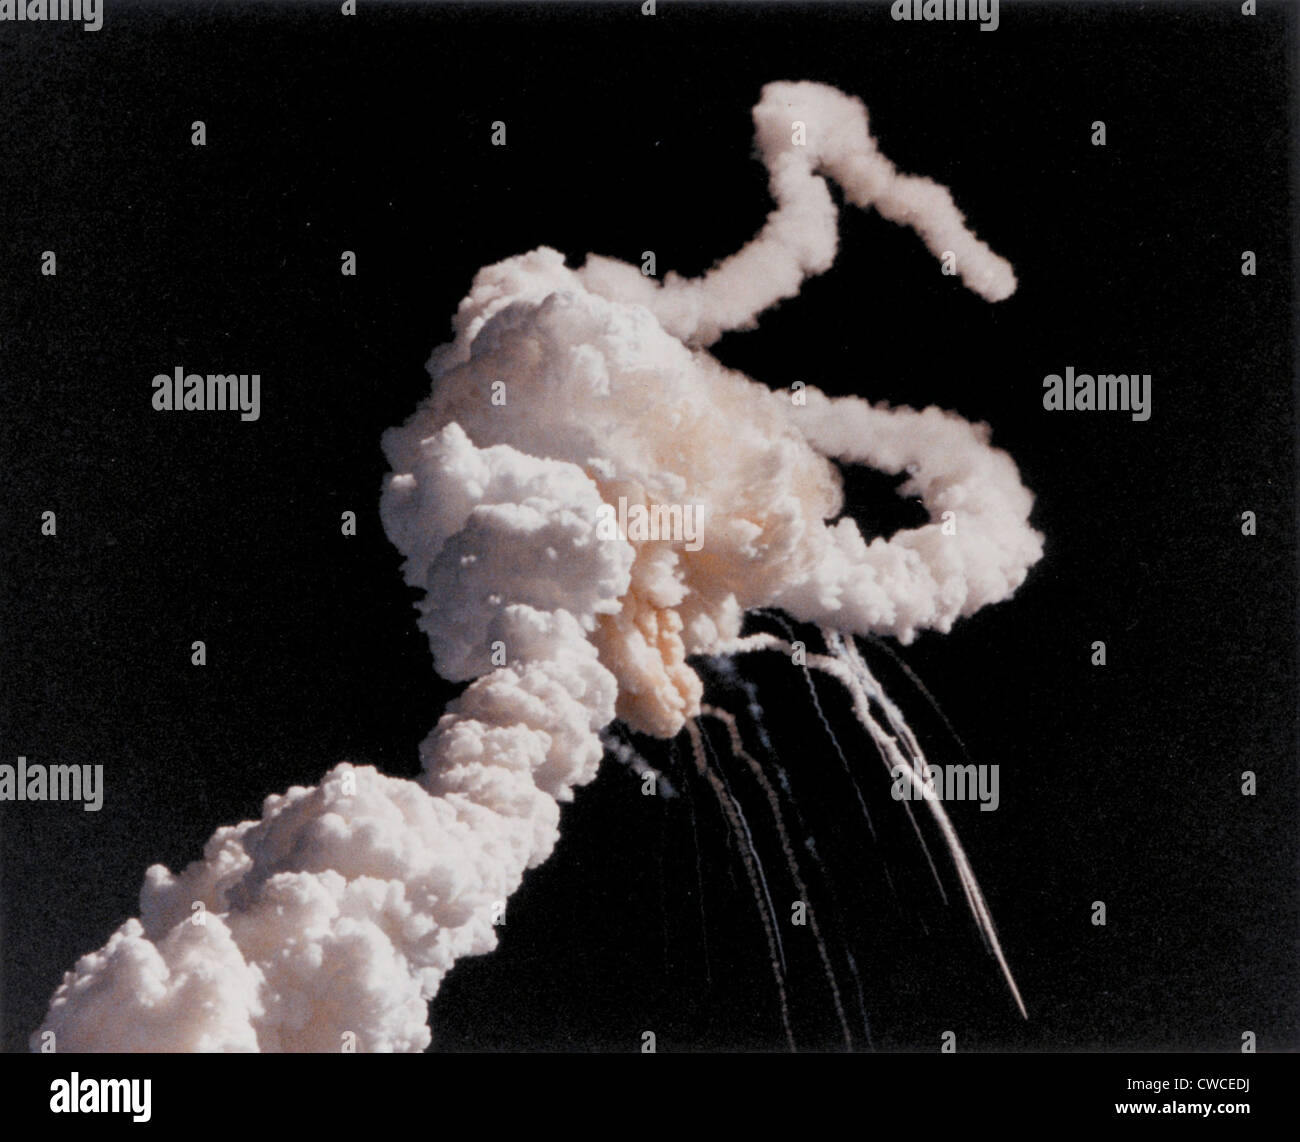 Space shuttle Challenger disaster. Space shuttle exhaust plumes entwined around a ball of gas after a few seconds after the Stock Photo